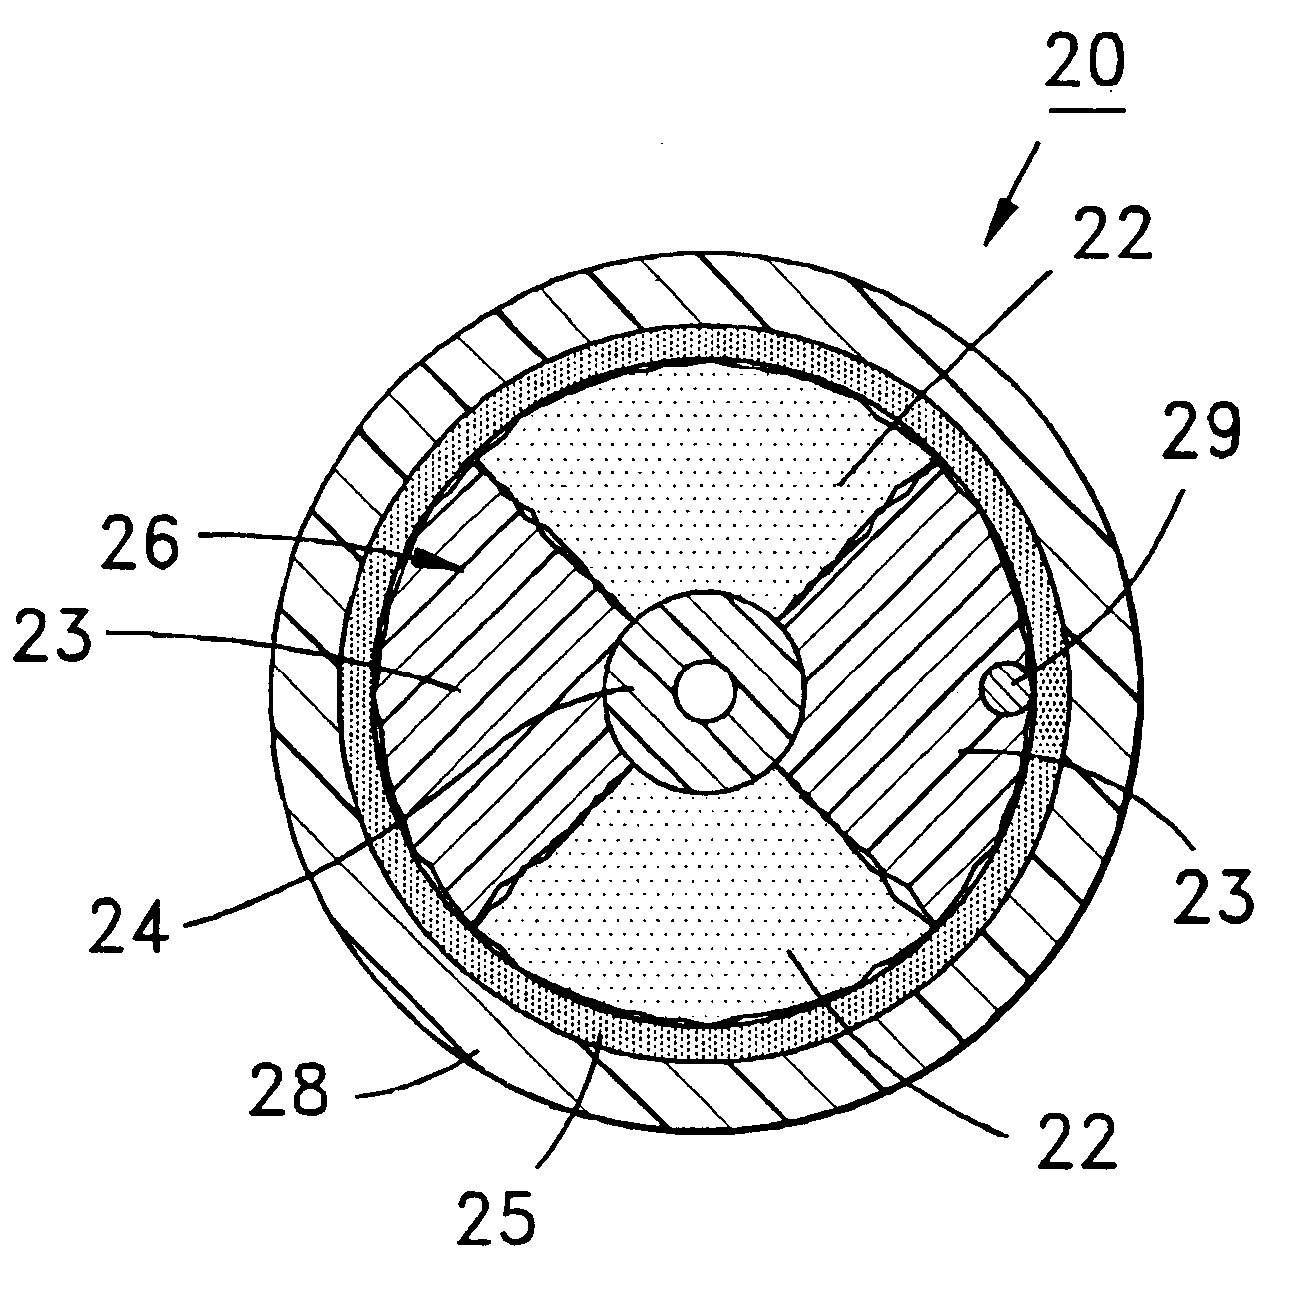 Fiber optic cables having ultra-low shrinking filaments and methods of making the same